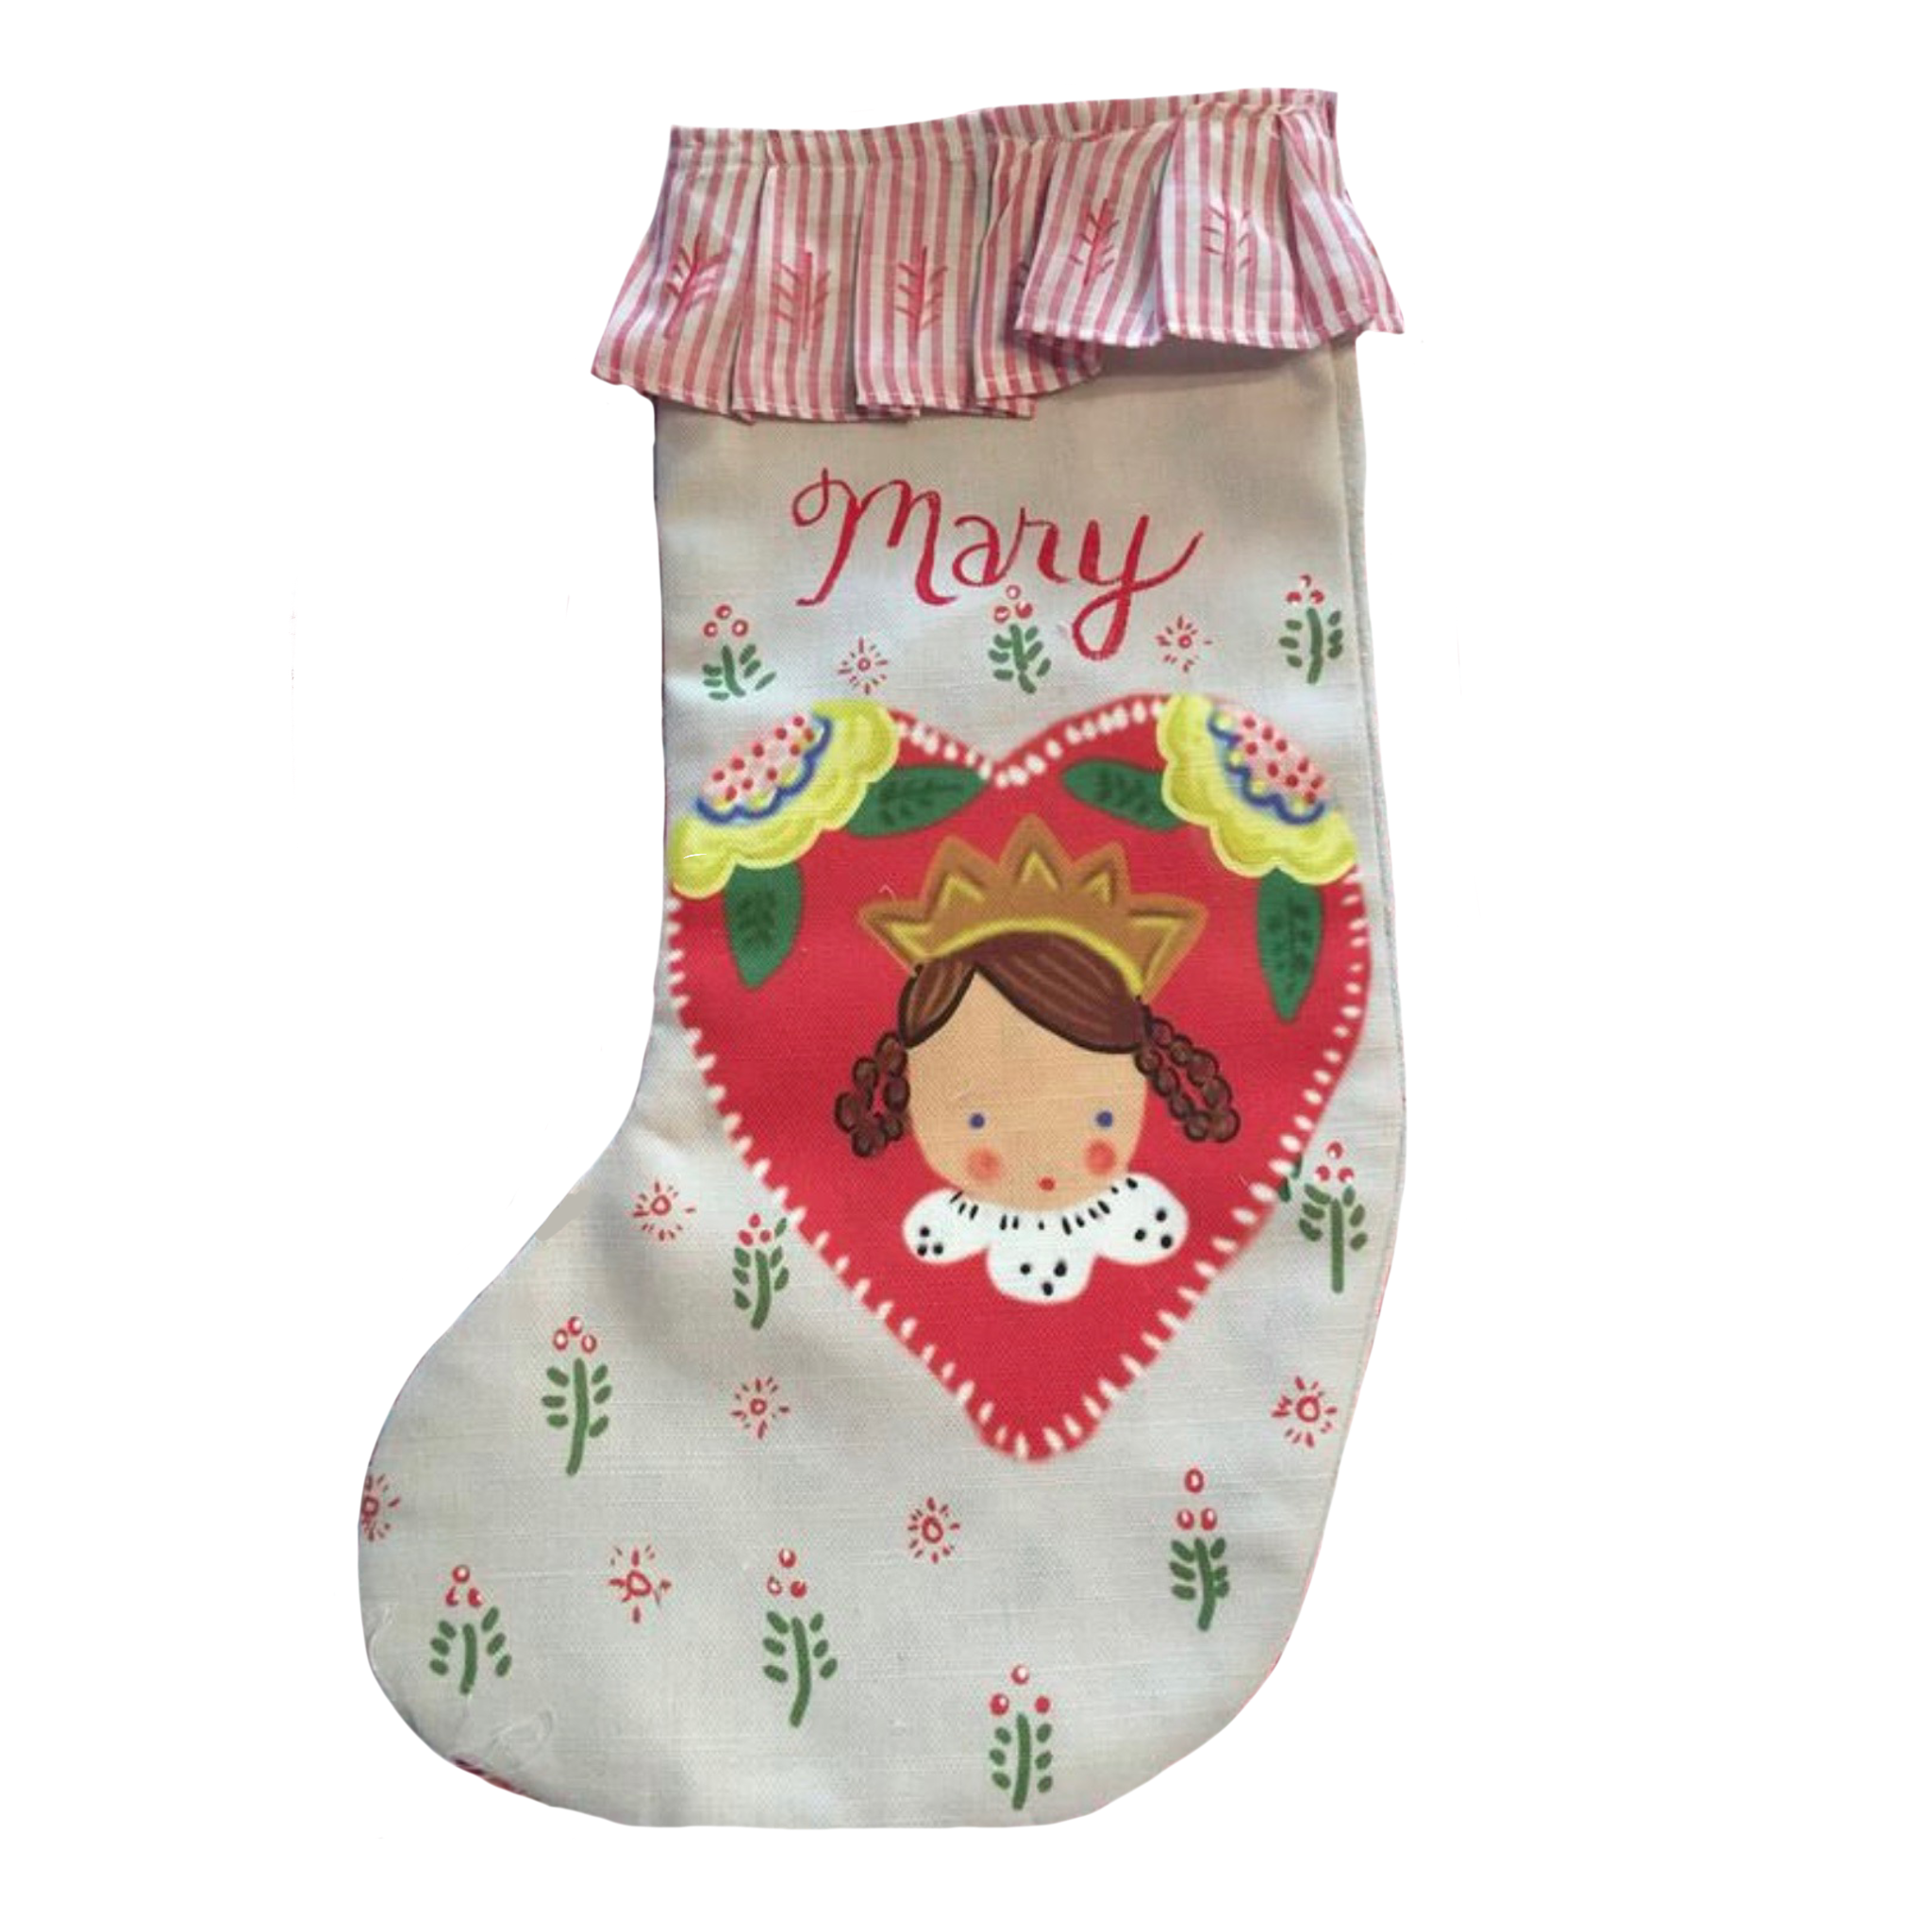 Stocking - Heart Girl - Tricia Lowenfield Design